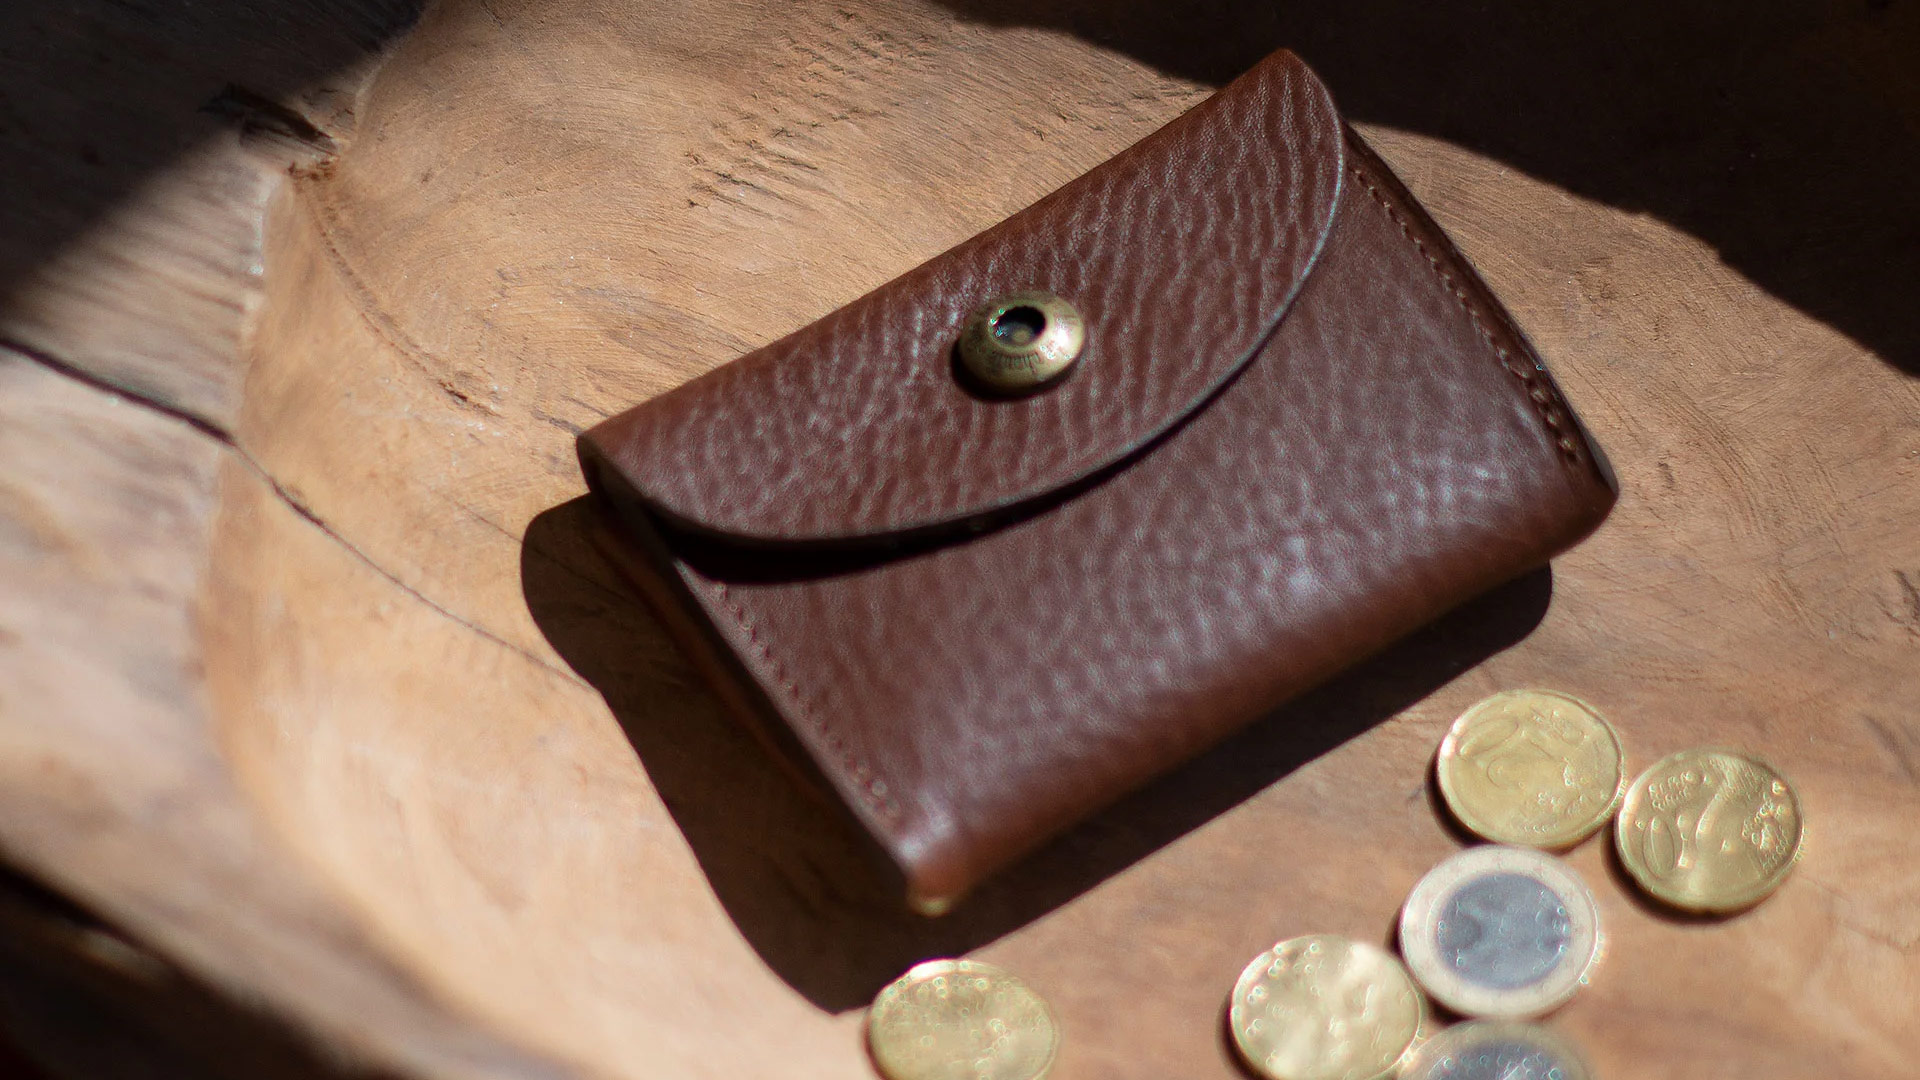 What is the Difference Between Wallet and Purse? – Atarni